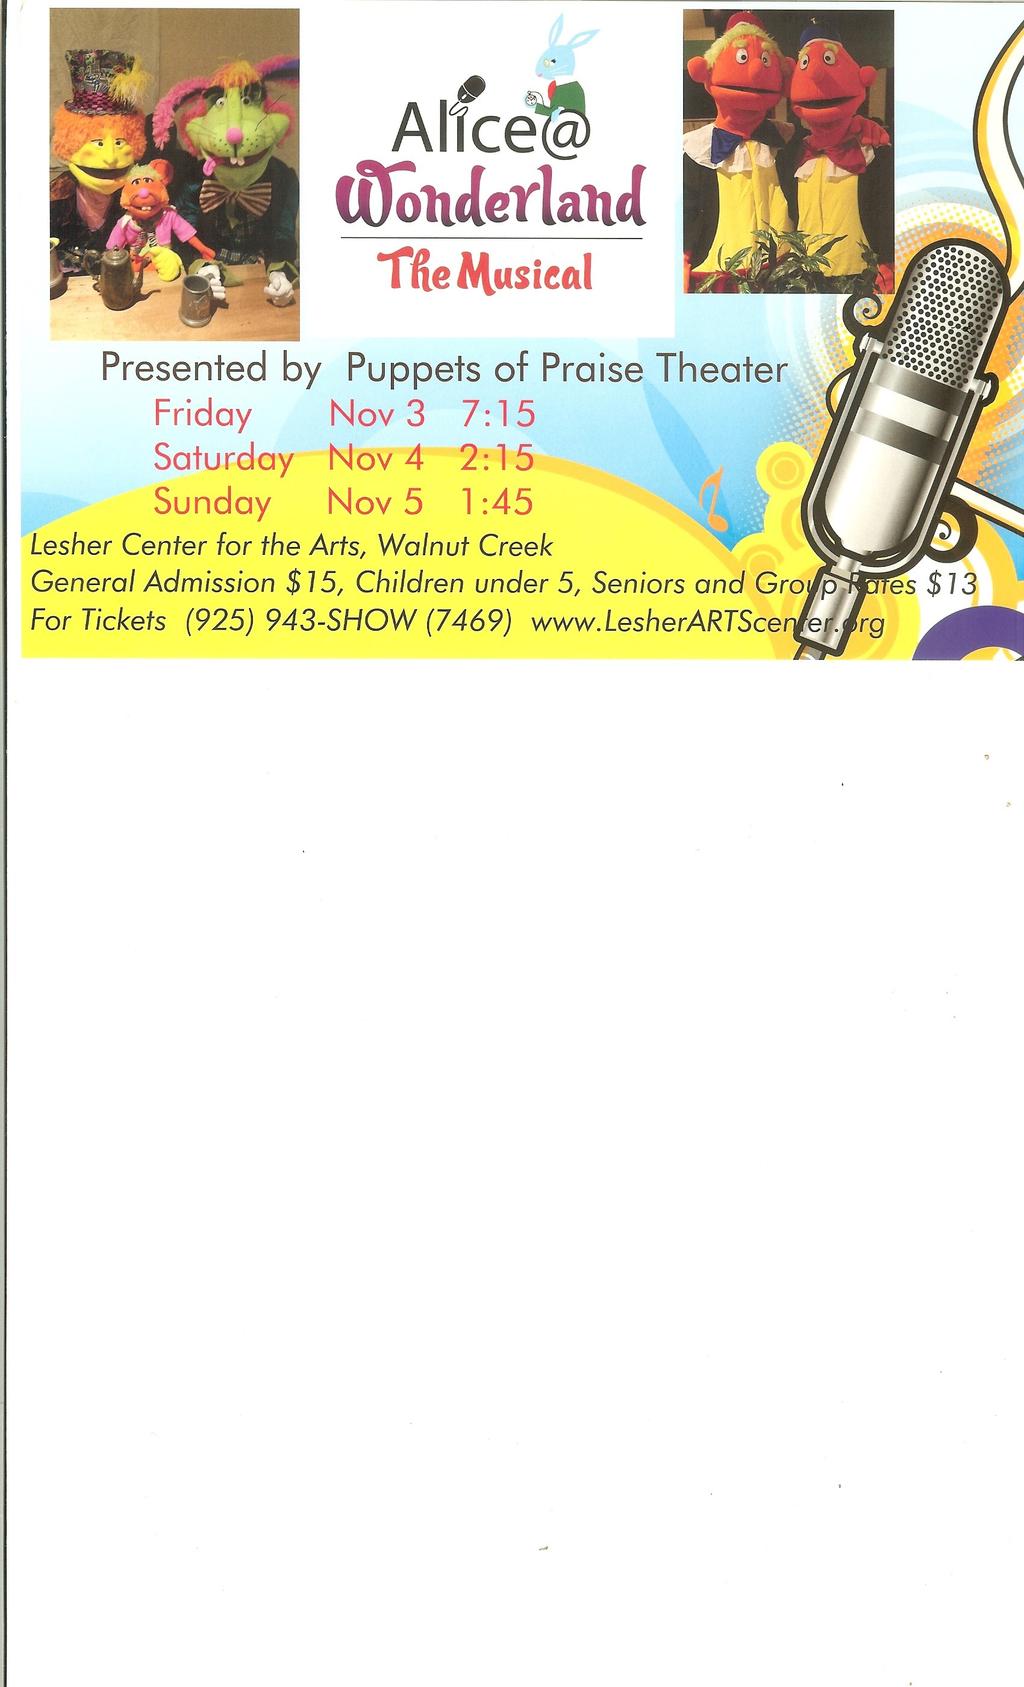 Tickets are now on sale at Lesher Center for the Arts for Alice @ Wonderland Puppets of Praise latest and maybe last major production.